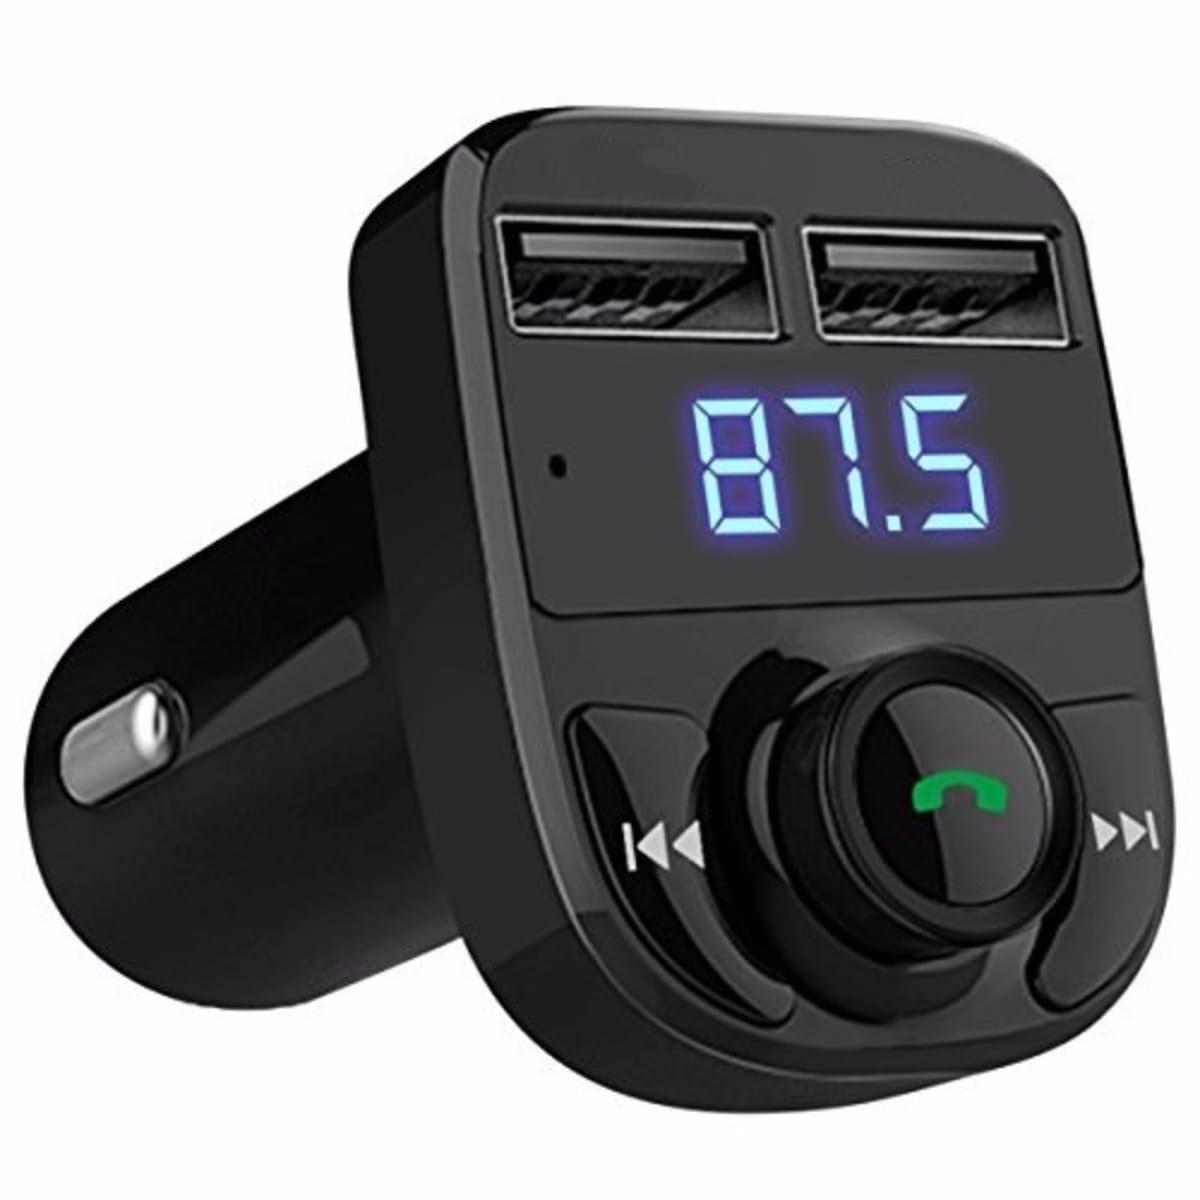 CARG7 Car Bluetooth Device with Car Charger, Transmitter, MP3